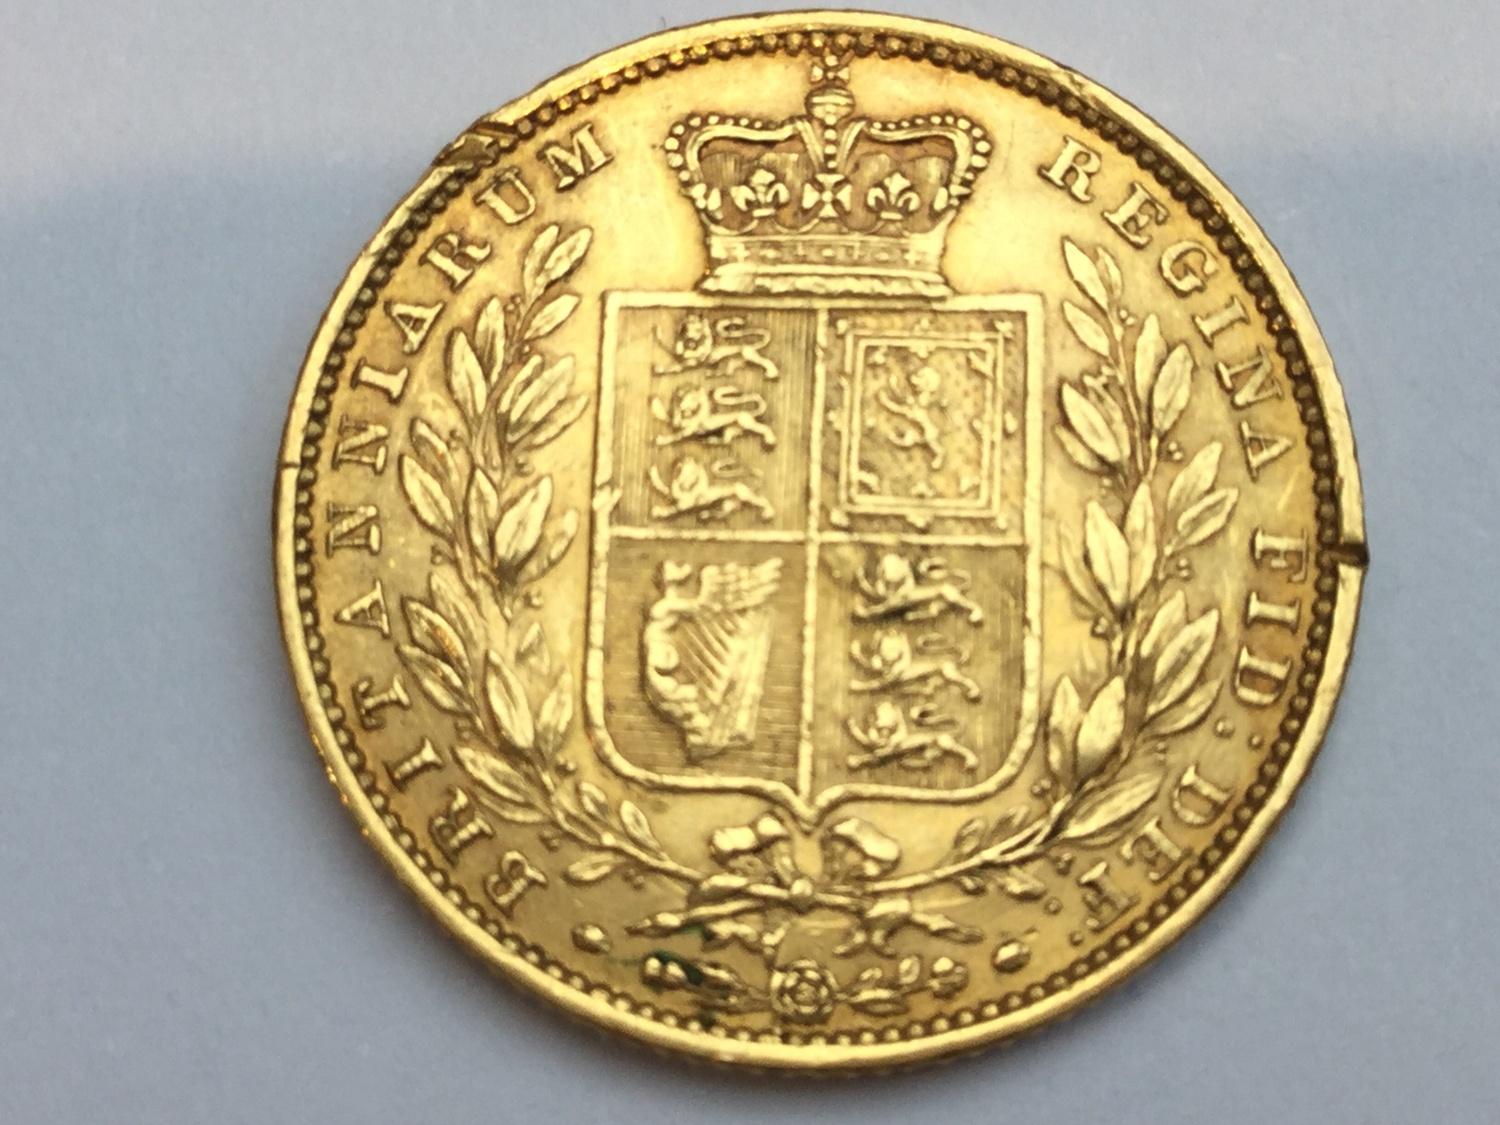 Queen Victoria sovereign, 1855, obv young head, rv crowned shield, weight 8.0g, condition Fine. - Image 2 of 2